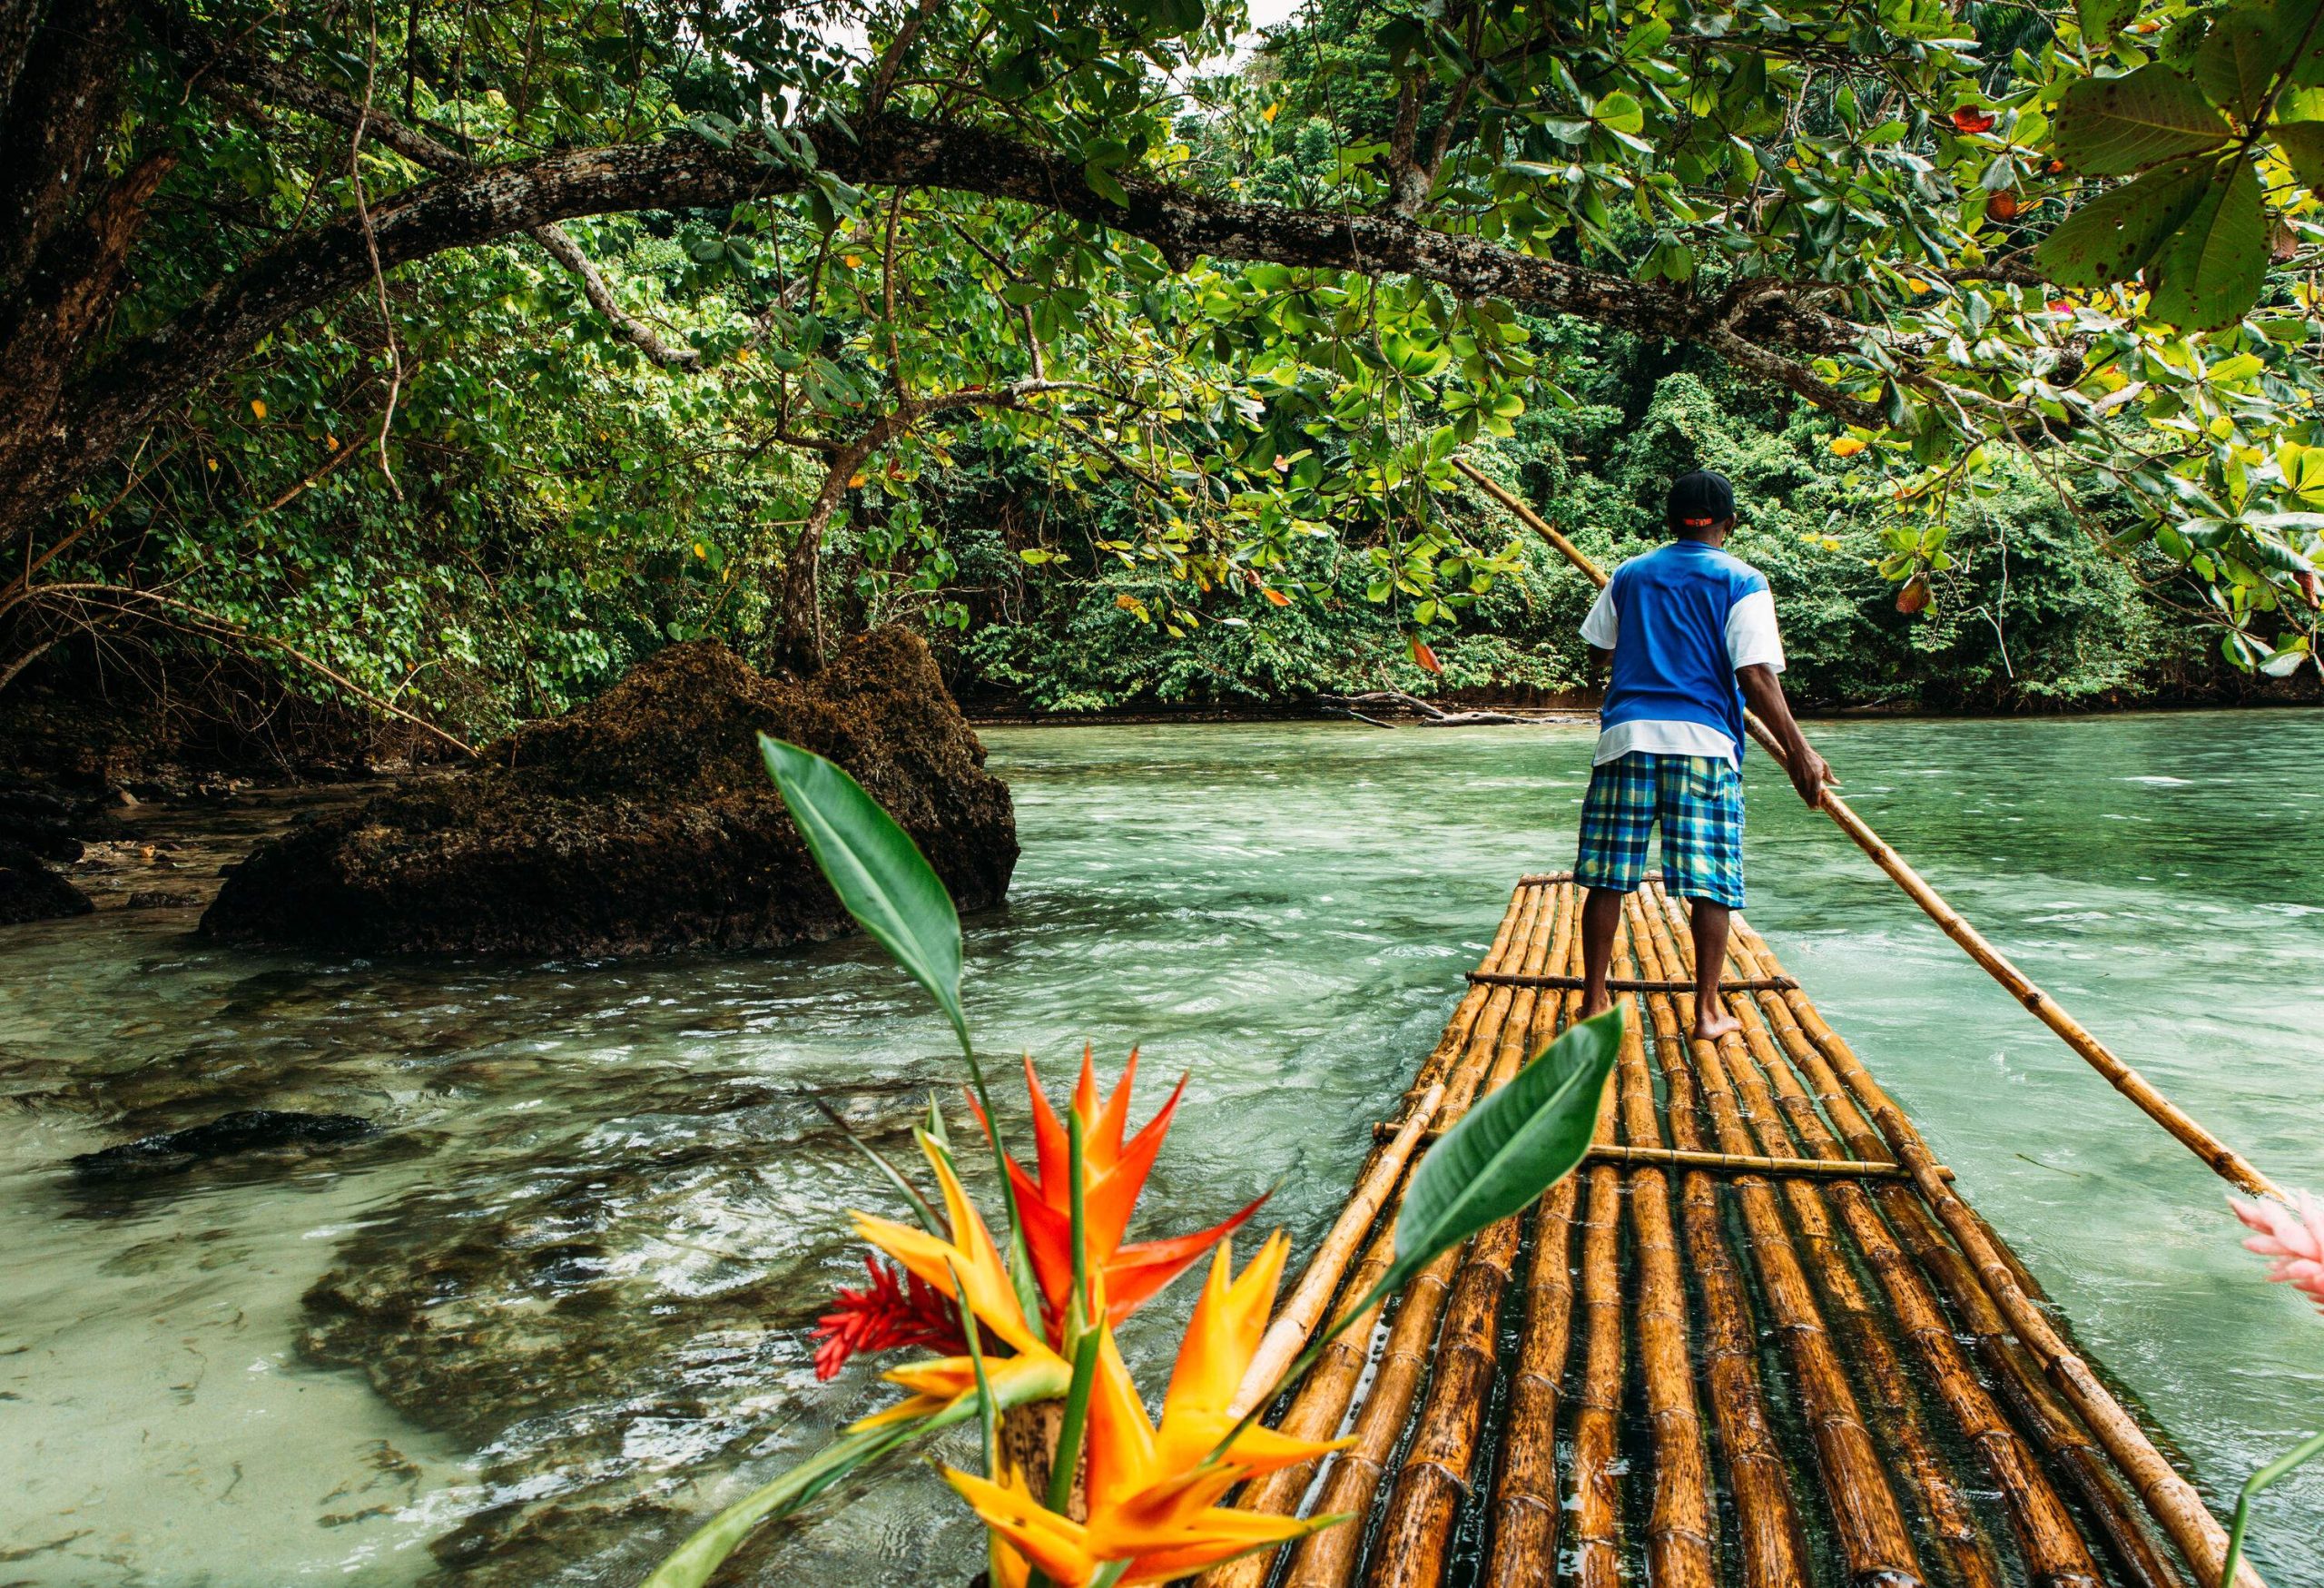 A male local paddles a bamboo raft on the forest lagoon.